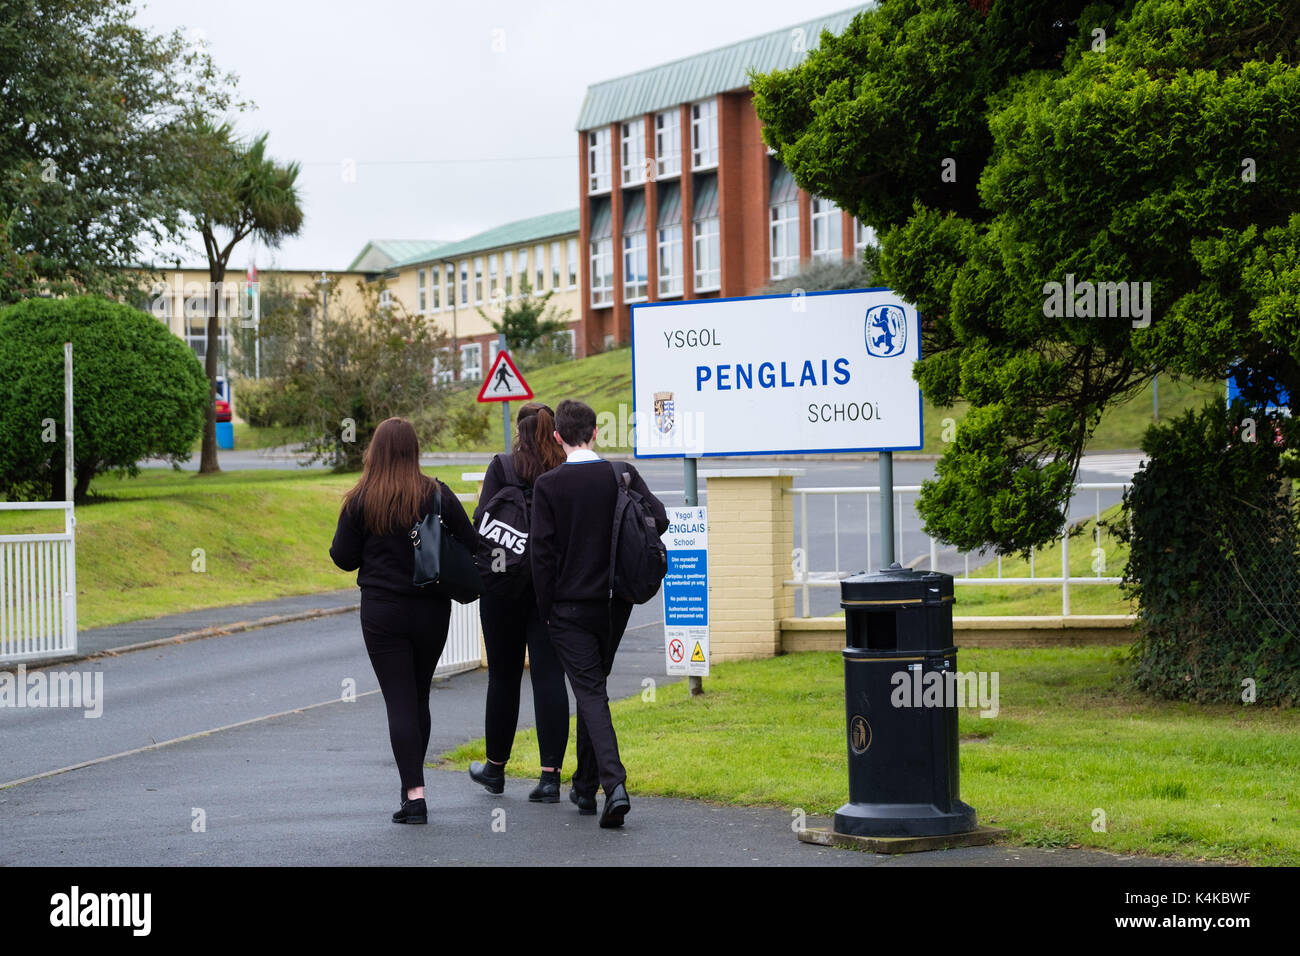 Aberystwyth Wales UK, Thursday 07 September 2017  Penglais secondary school in Aberystwyth Wales, where on the first day of the new term (Tuesday 06 Sept 2017) some 500 pupils were placed in detention and issued with warning notices for failing to comply with the school’s new stricter uniform policy Parents have reacted furiously to the schools stance, and have protested vociferously on social media and  in the press and broadcasting  photo © Keith Morris / Alamy Live News Stock Photo